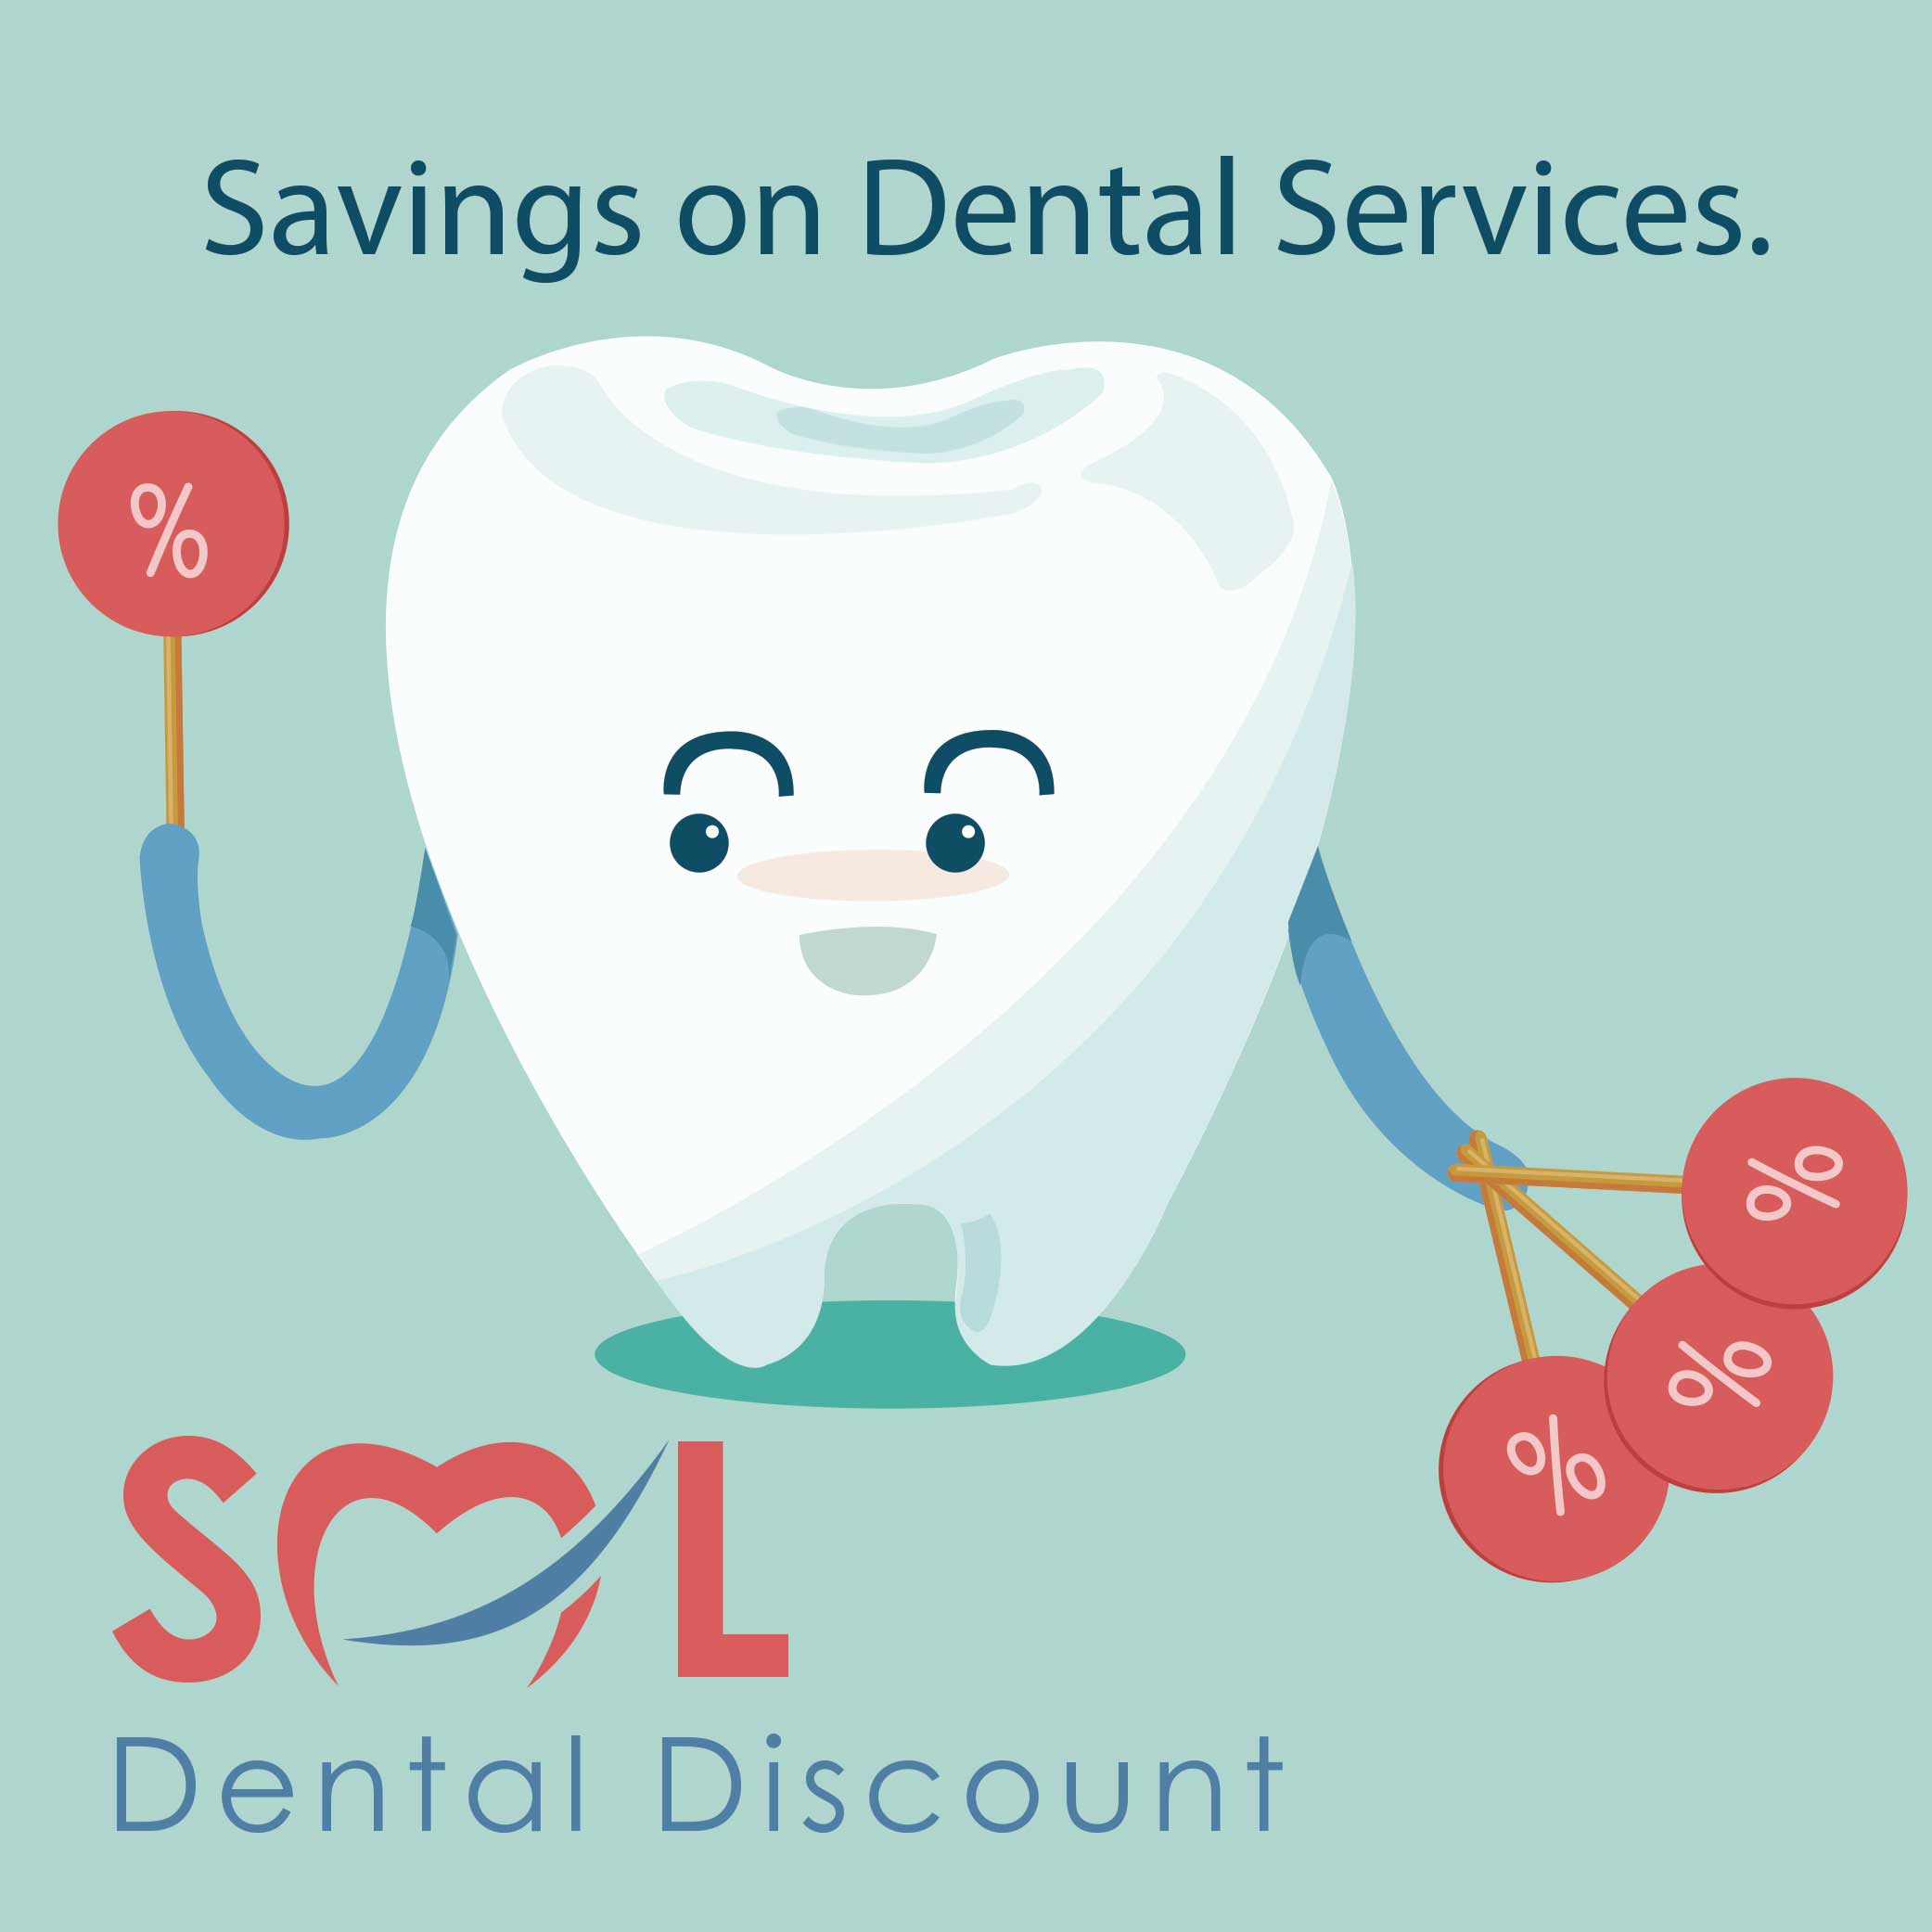 SML Dental Discounts, powered by Aetna Dental Access, a Benefit Boost Subscription Product